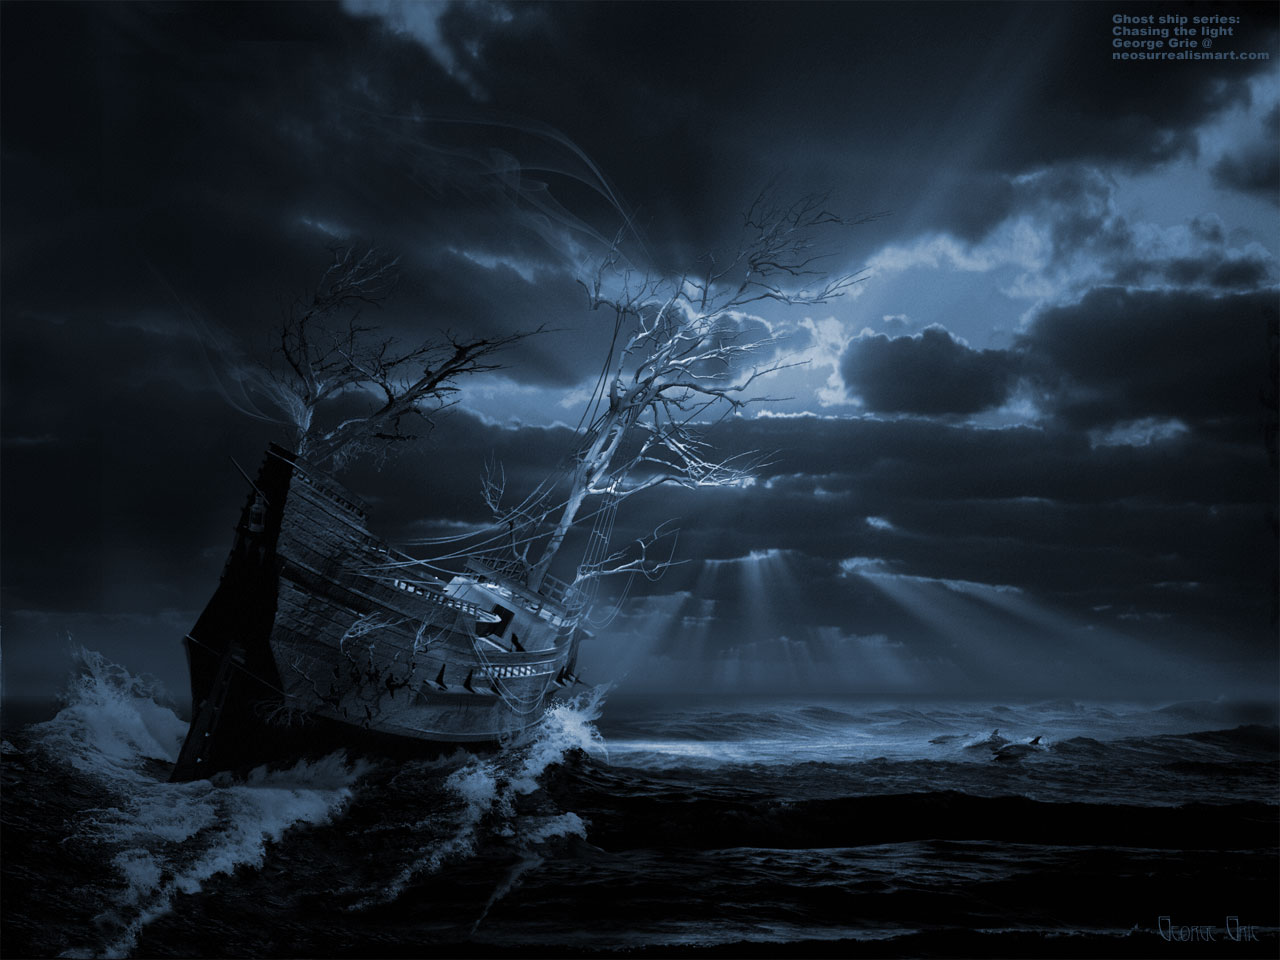 Ghost ship series: Chasing the light 3D wallpaper. Dark mystery apparition sailboat romantic Ghost ships phantom boat supernatural isolation, yacht mysterious Flying Dutchman spirit pirate vessel, dolphins work of art, shadow sunlight, surrealism solitude, ocean water sea sunset, clouds sunbeams.